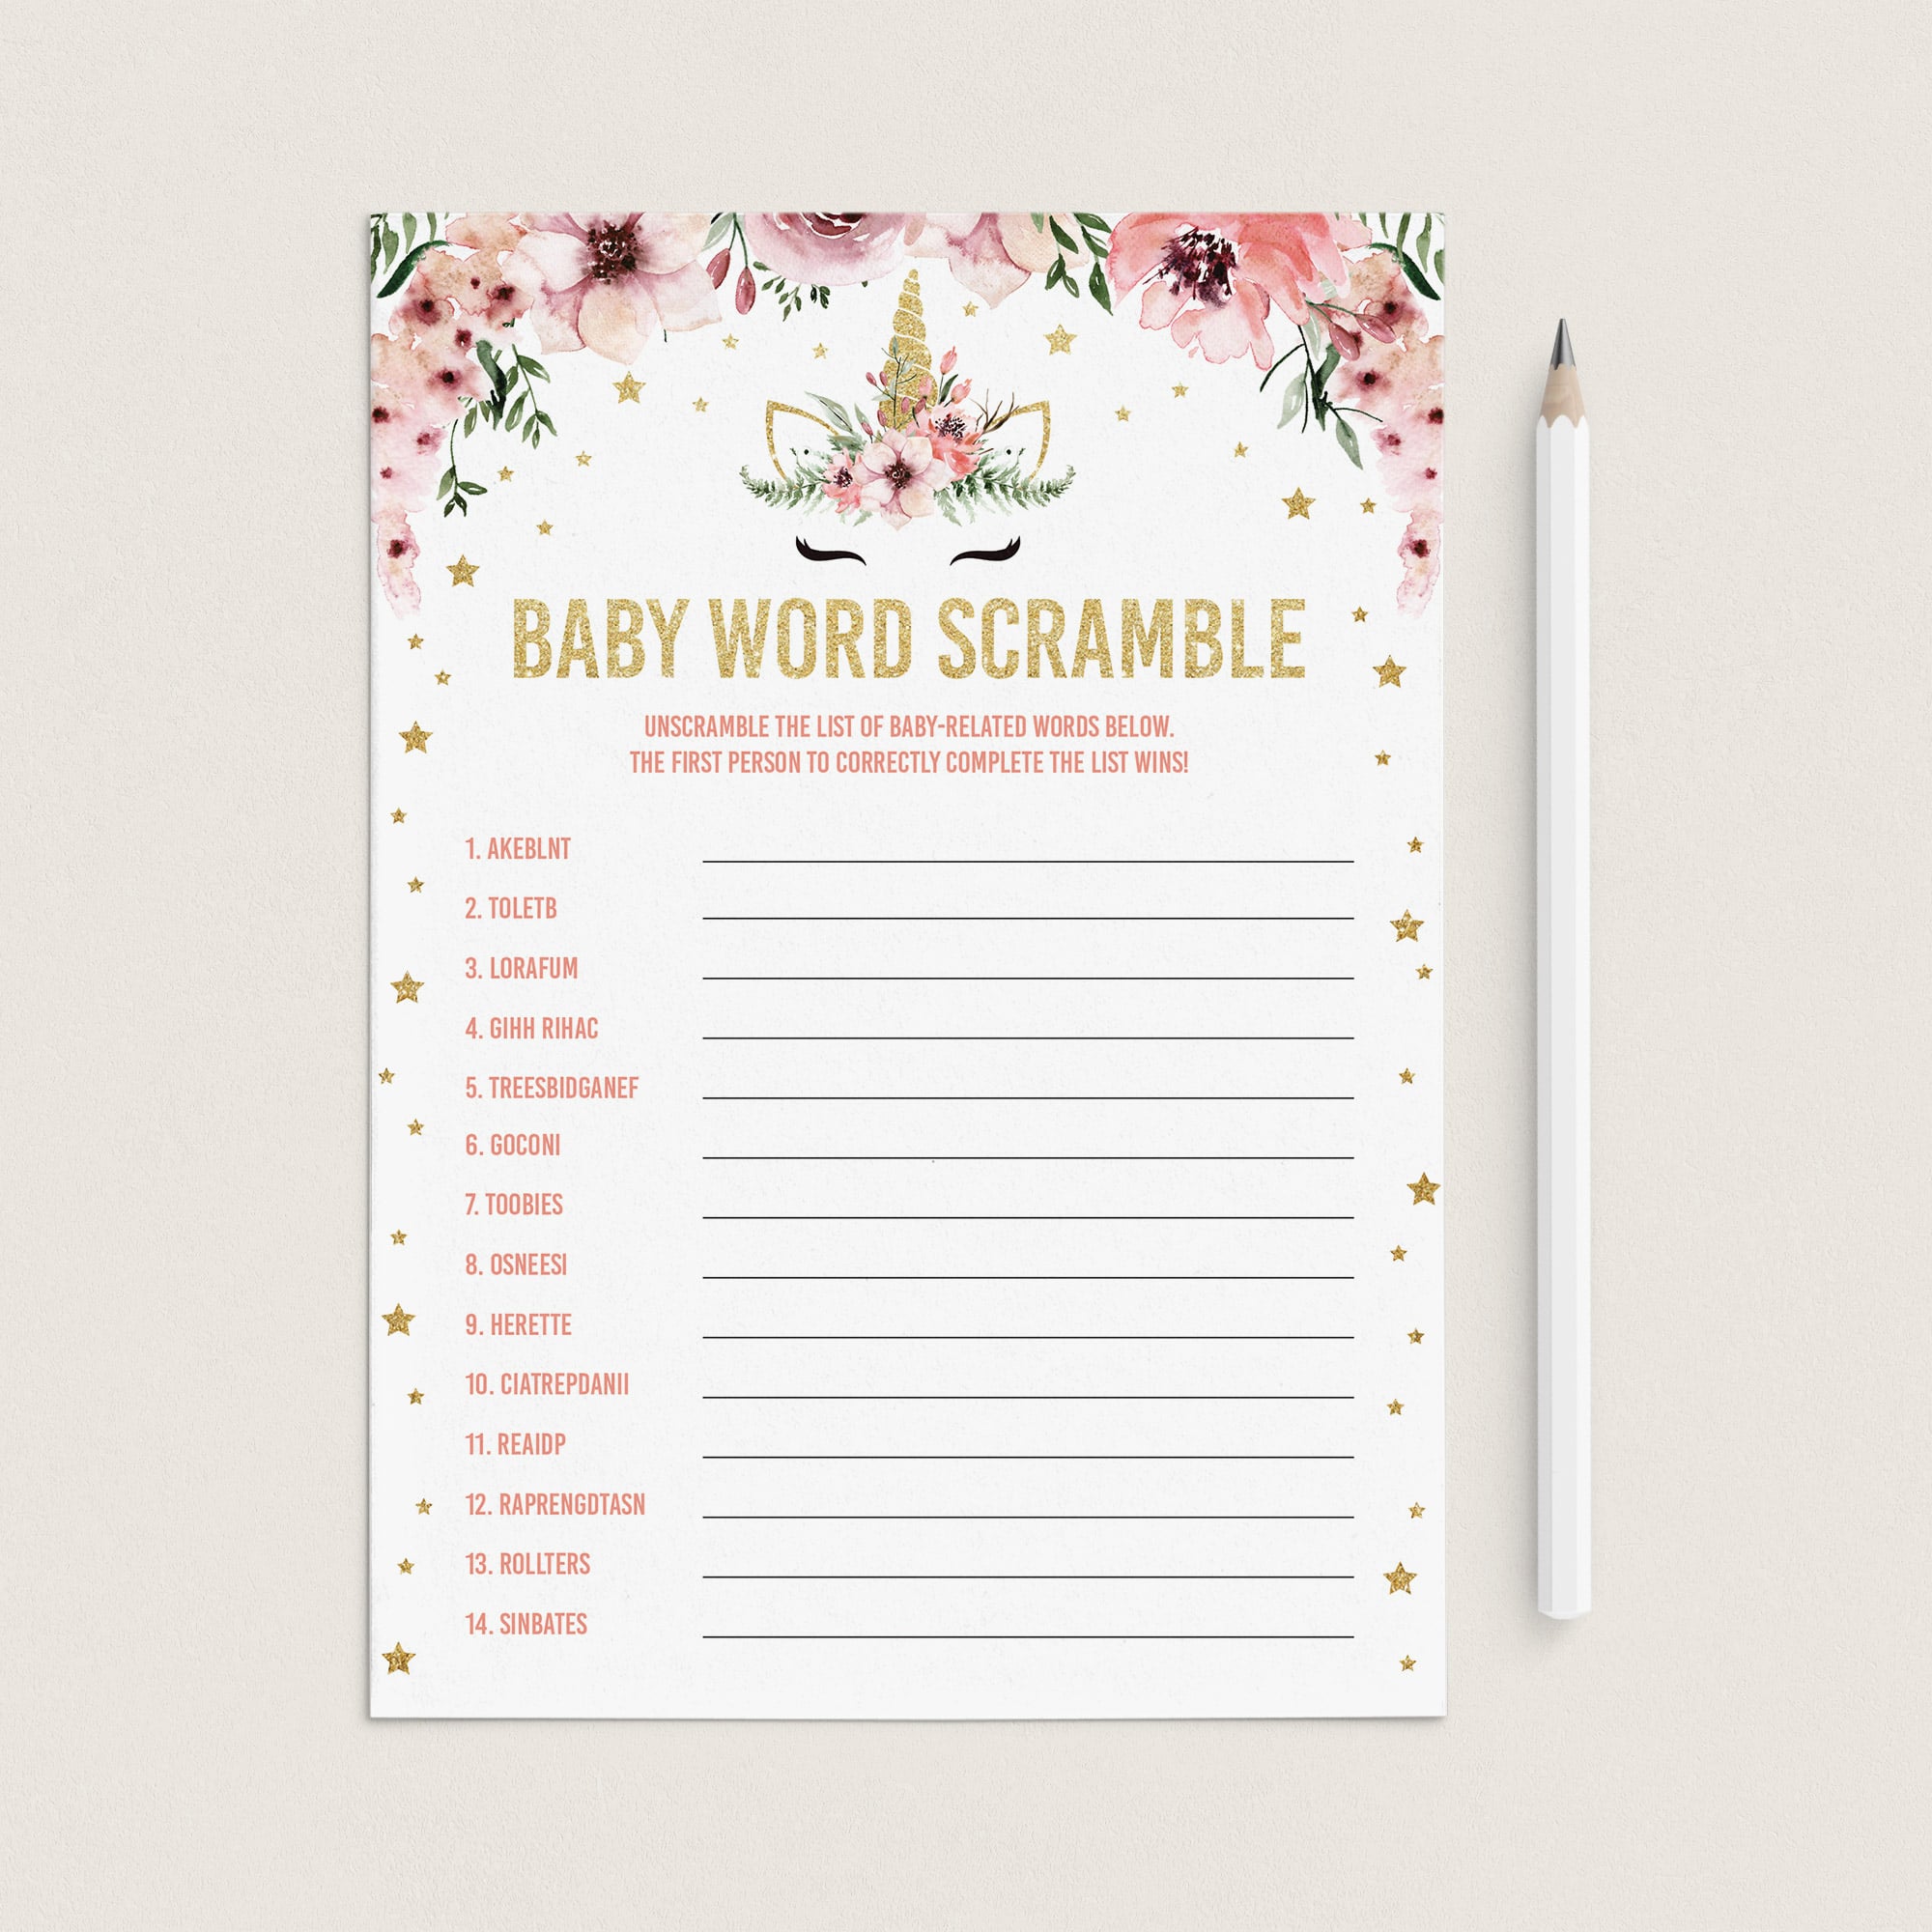 Download word scramble answers for baby party by LittleSizzle